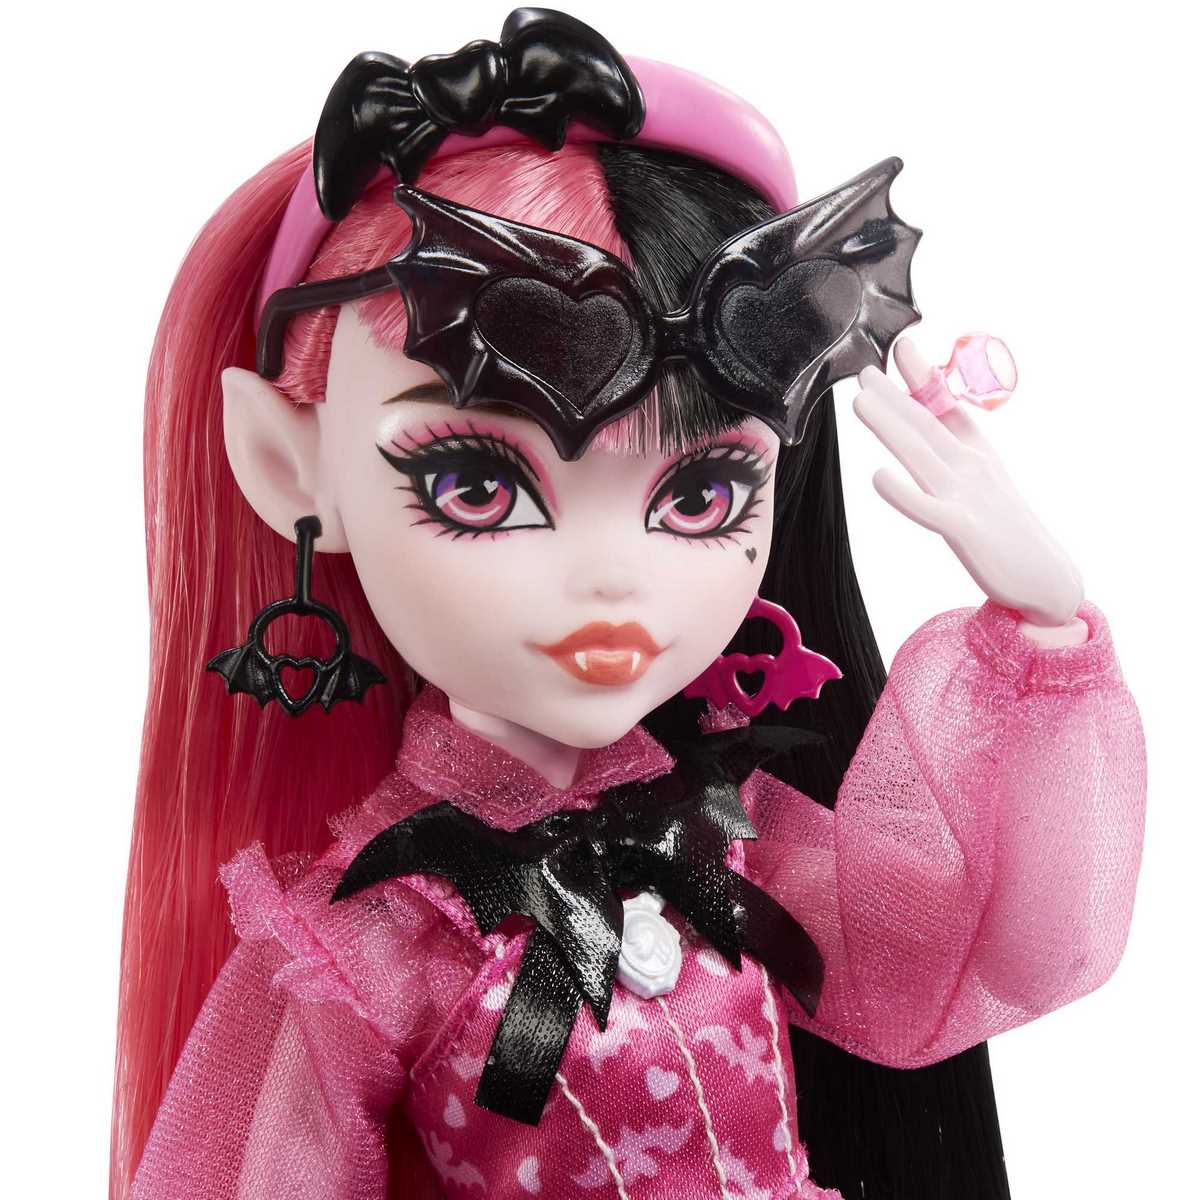  Monster High Poupees Garcon